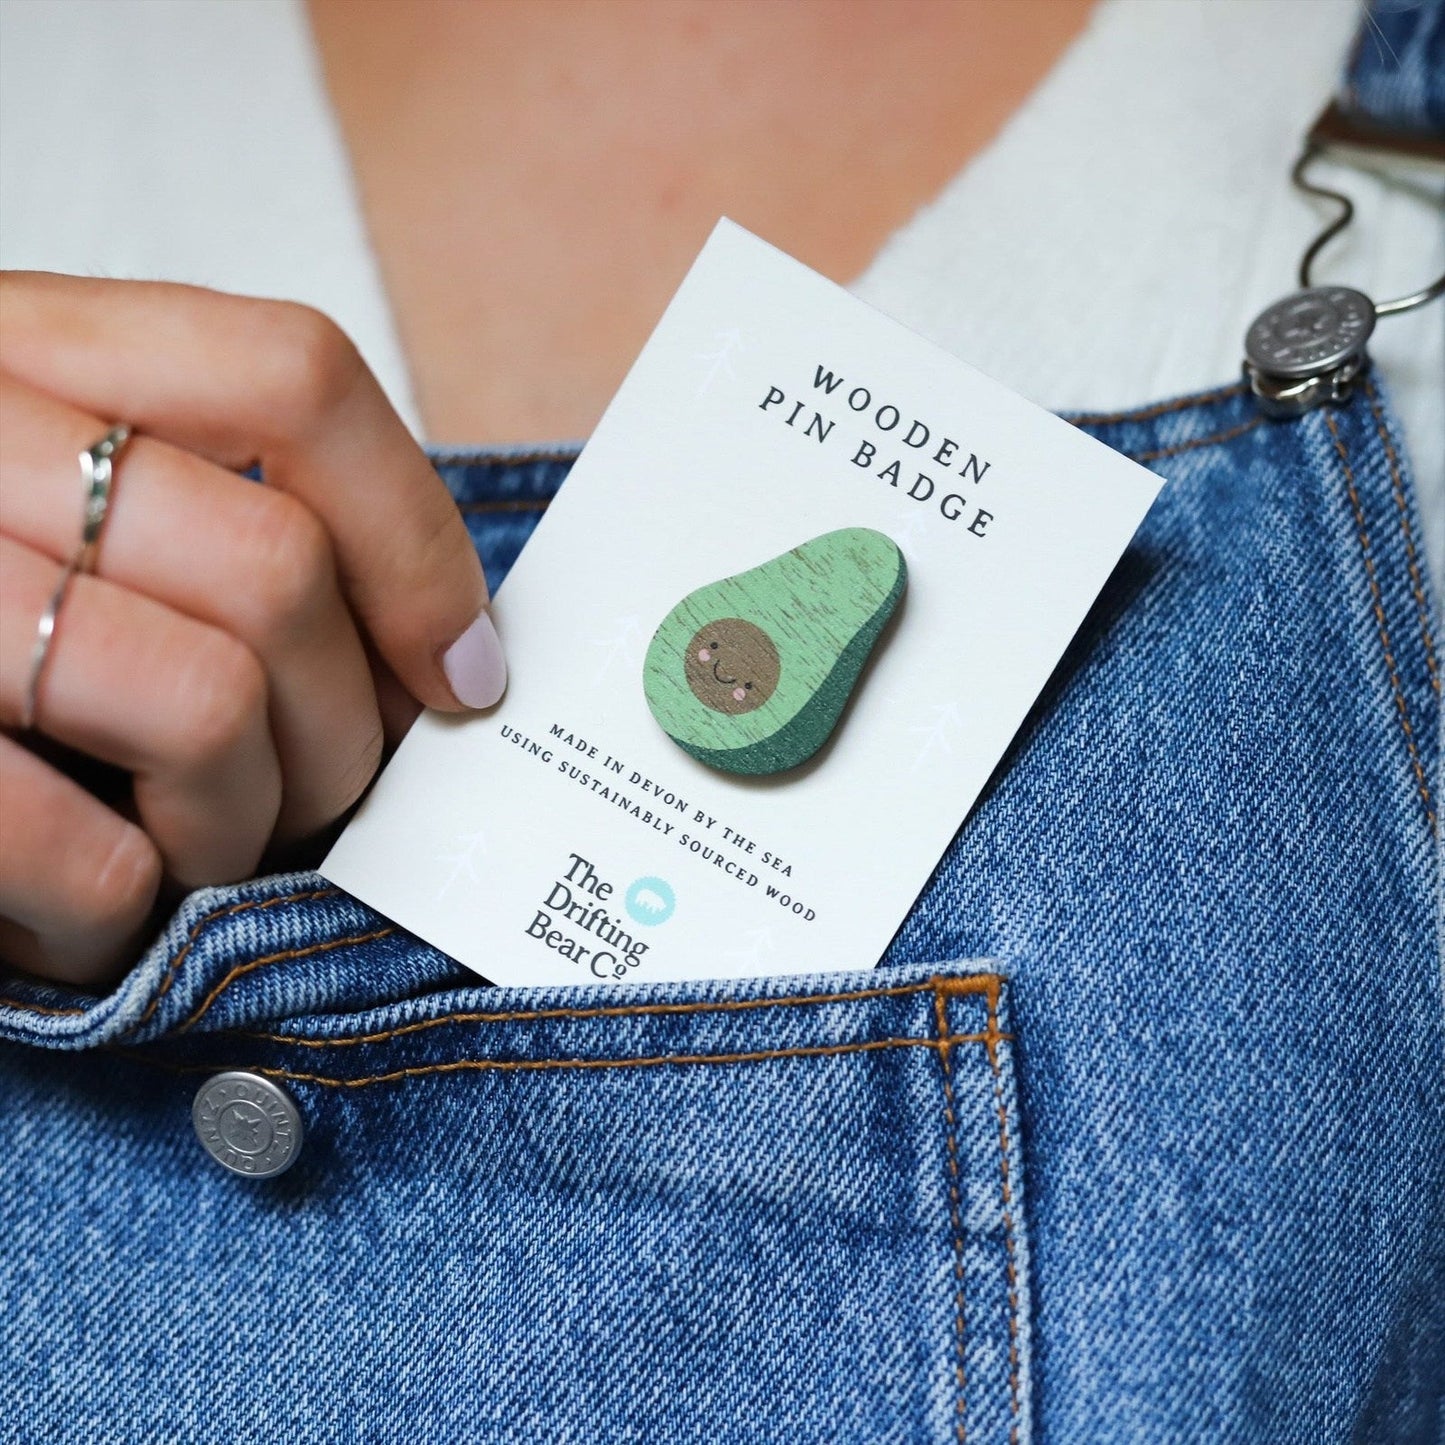 Wooden pin badge in the shape of an avocado with cute smiley face. Printed on walnut veneer, pinned onto a recycled backing card which reads 'Wooden Pin Badge' and 'Made in Devon by the sea using sustainably sourced wood'. Pictured with dungarees.